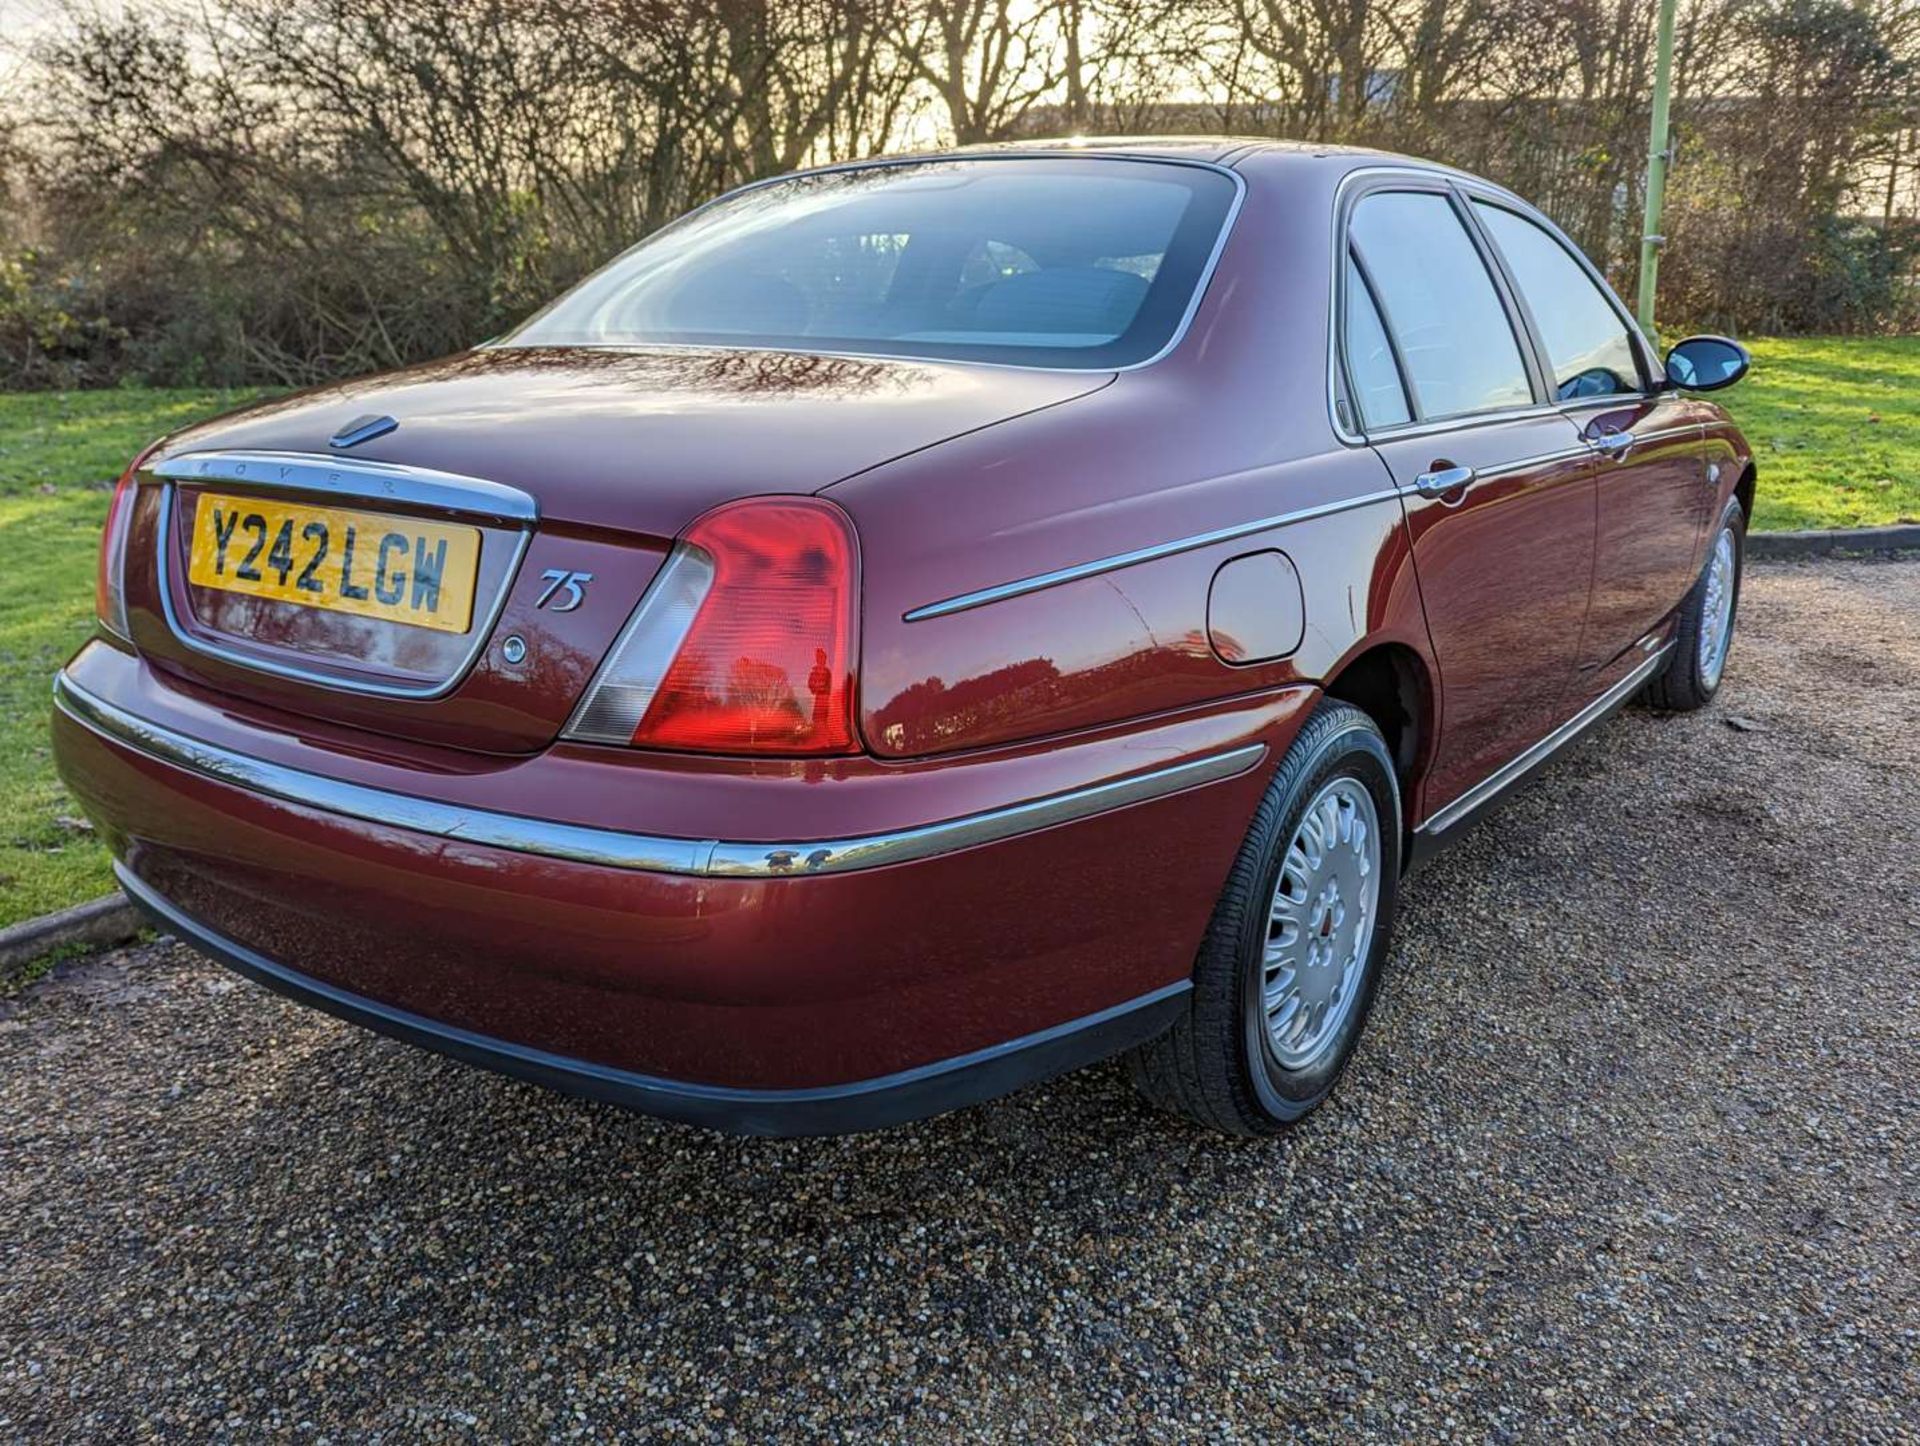 2001 ROVER 75 CLUB 2.5 V6 AUTOMATIC 14,641 MILES - Image 10 of 26